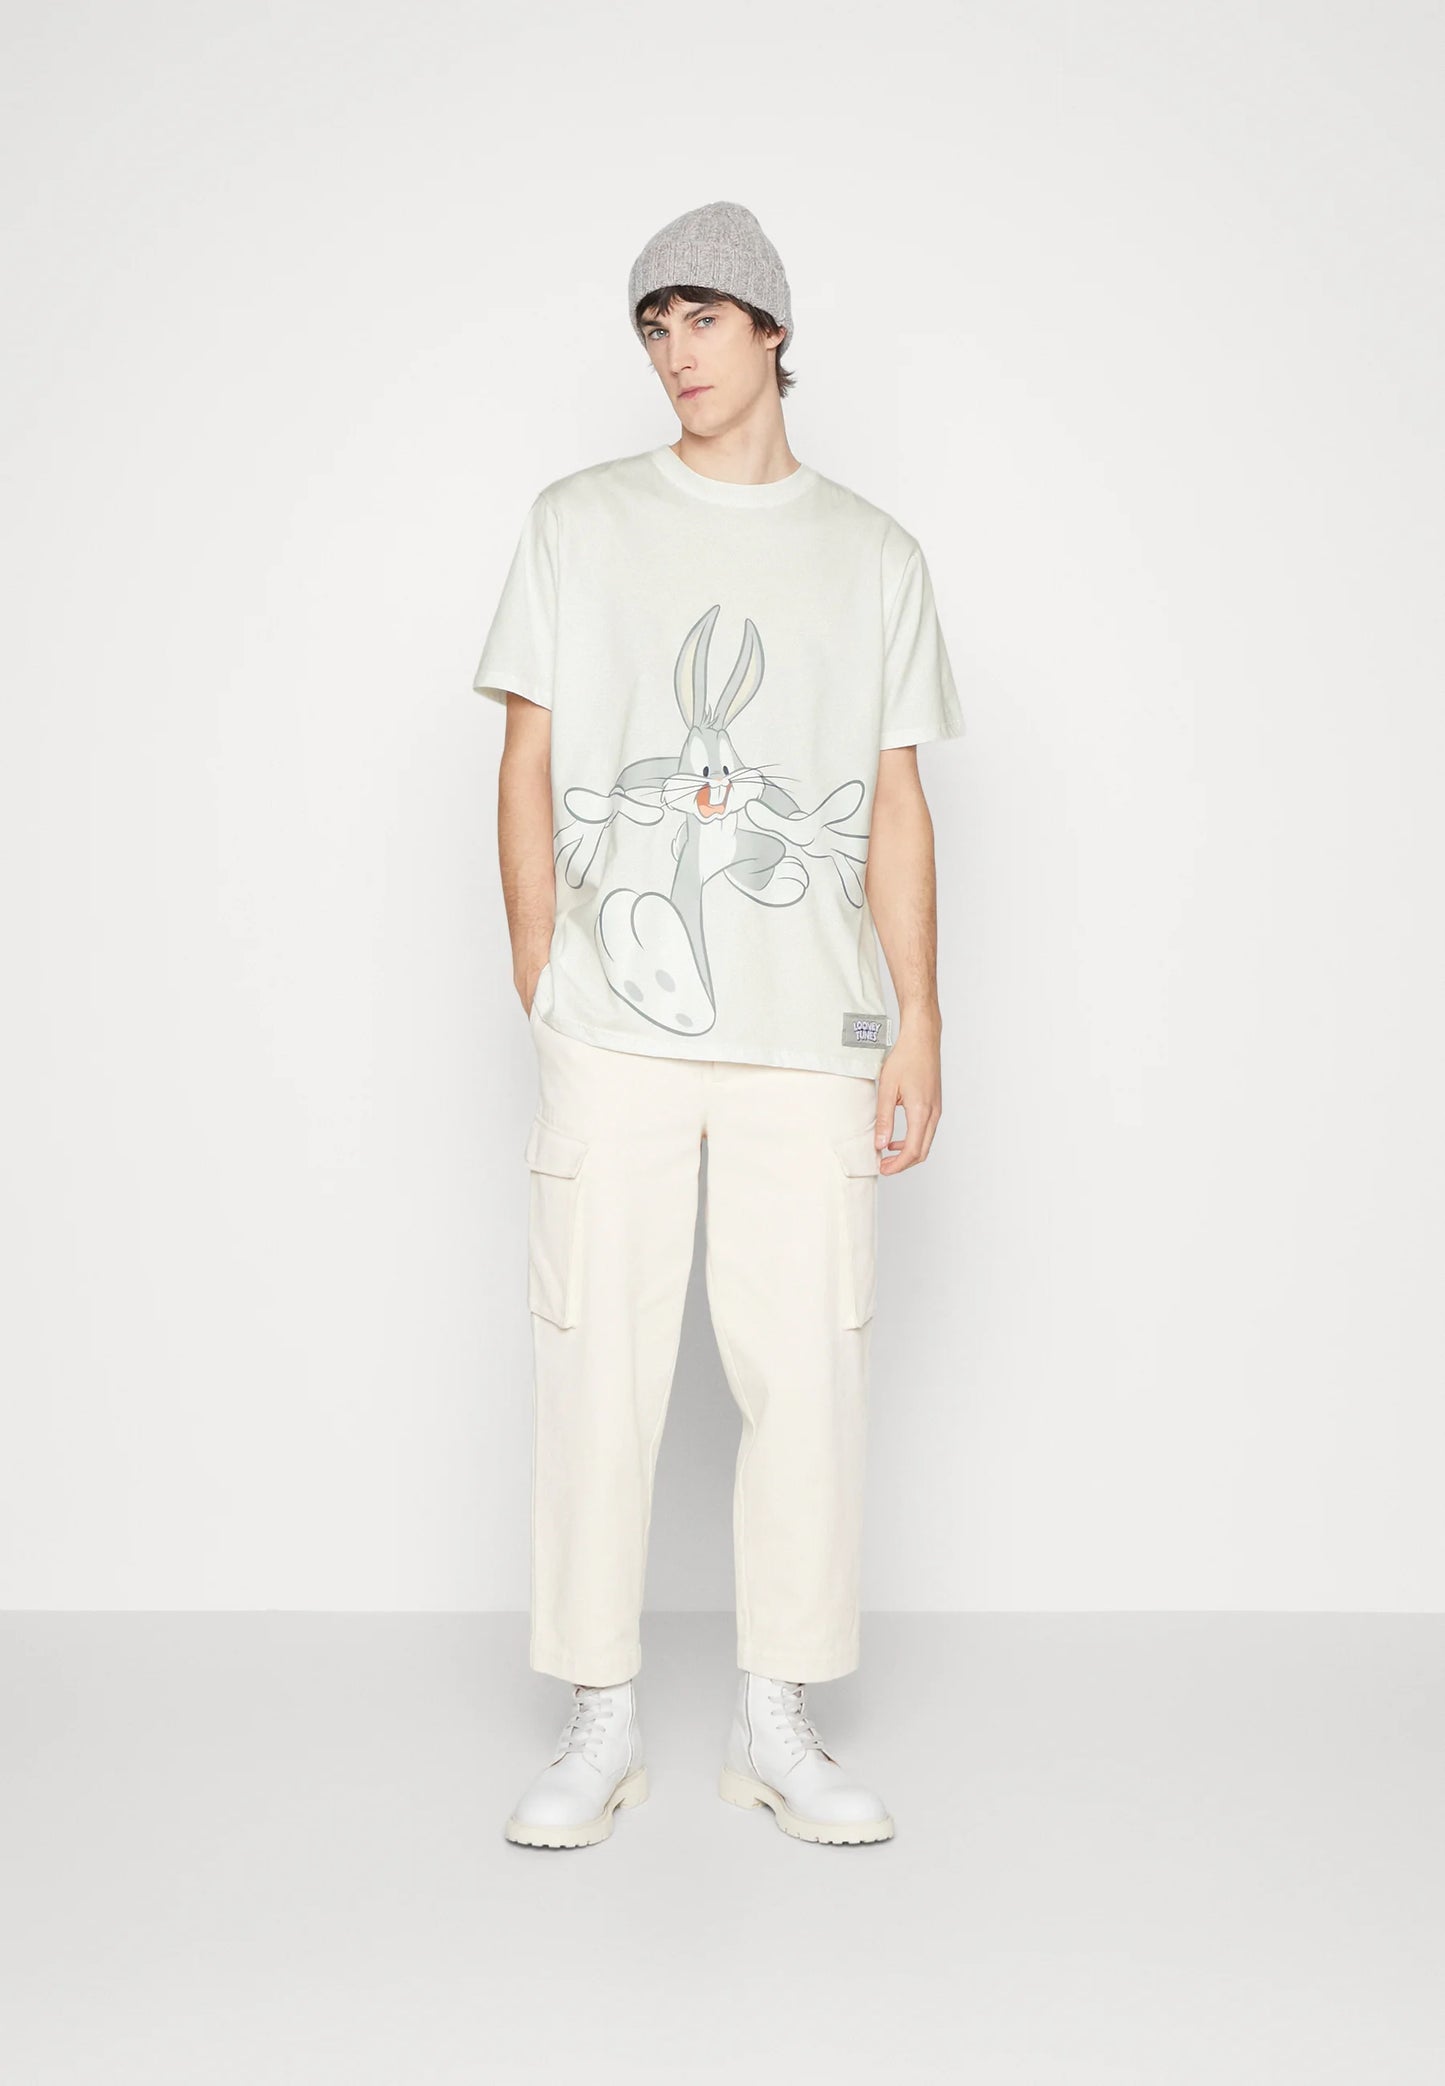 FAMILY FIRST - BUGS TEE